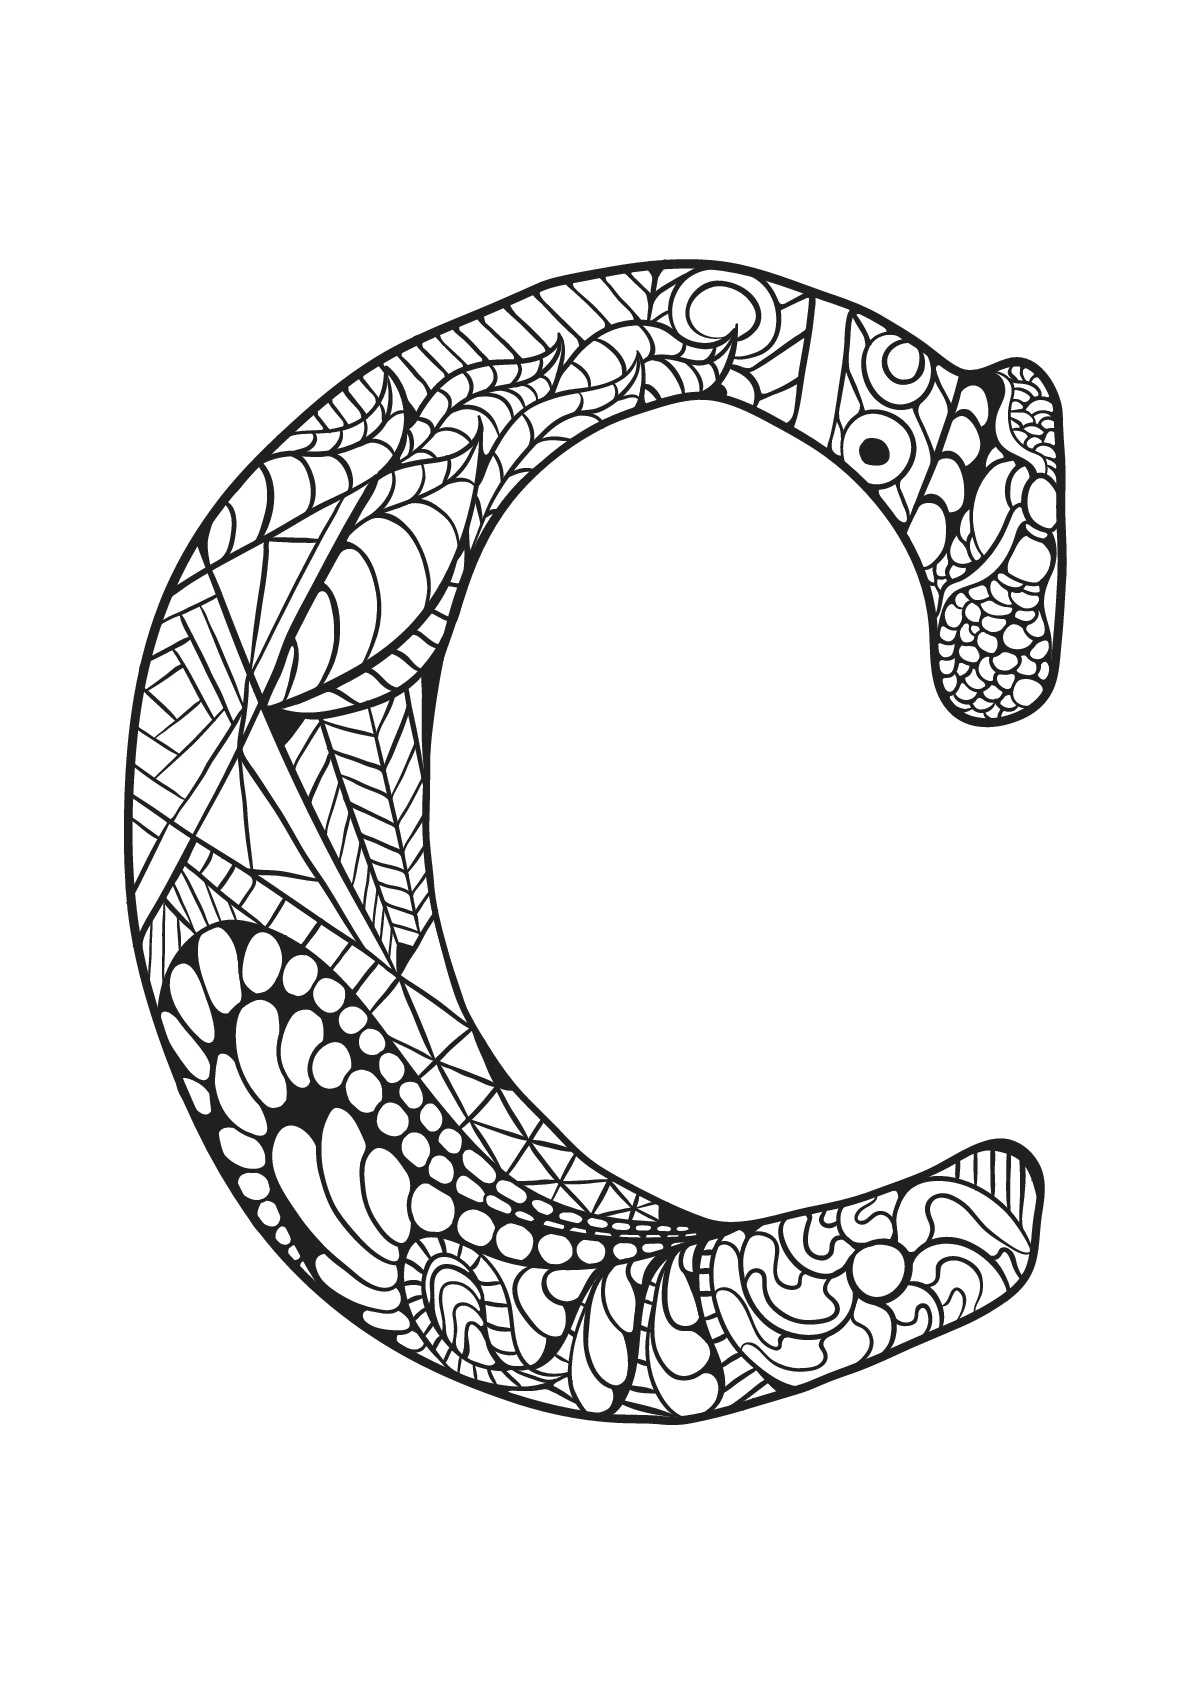 Alphabet coloring page to print and color for free : C